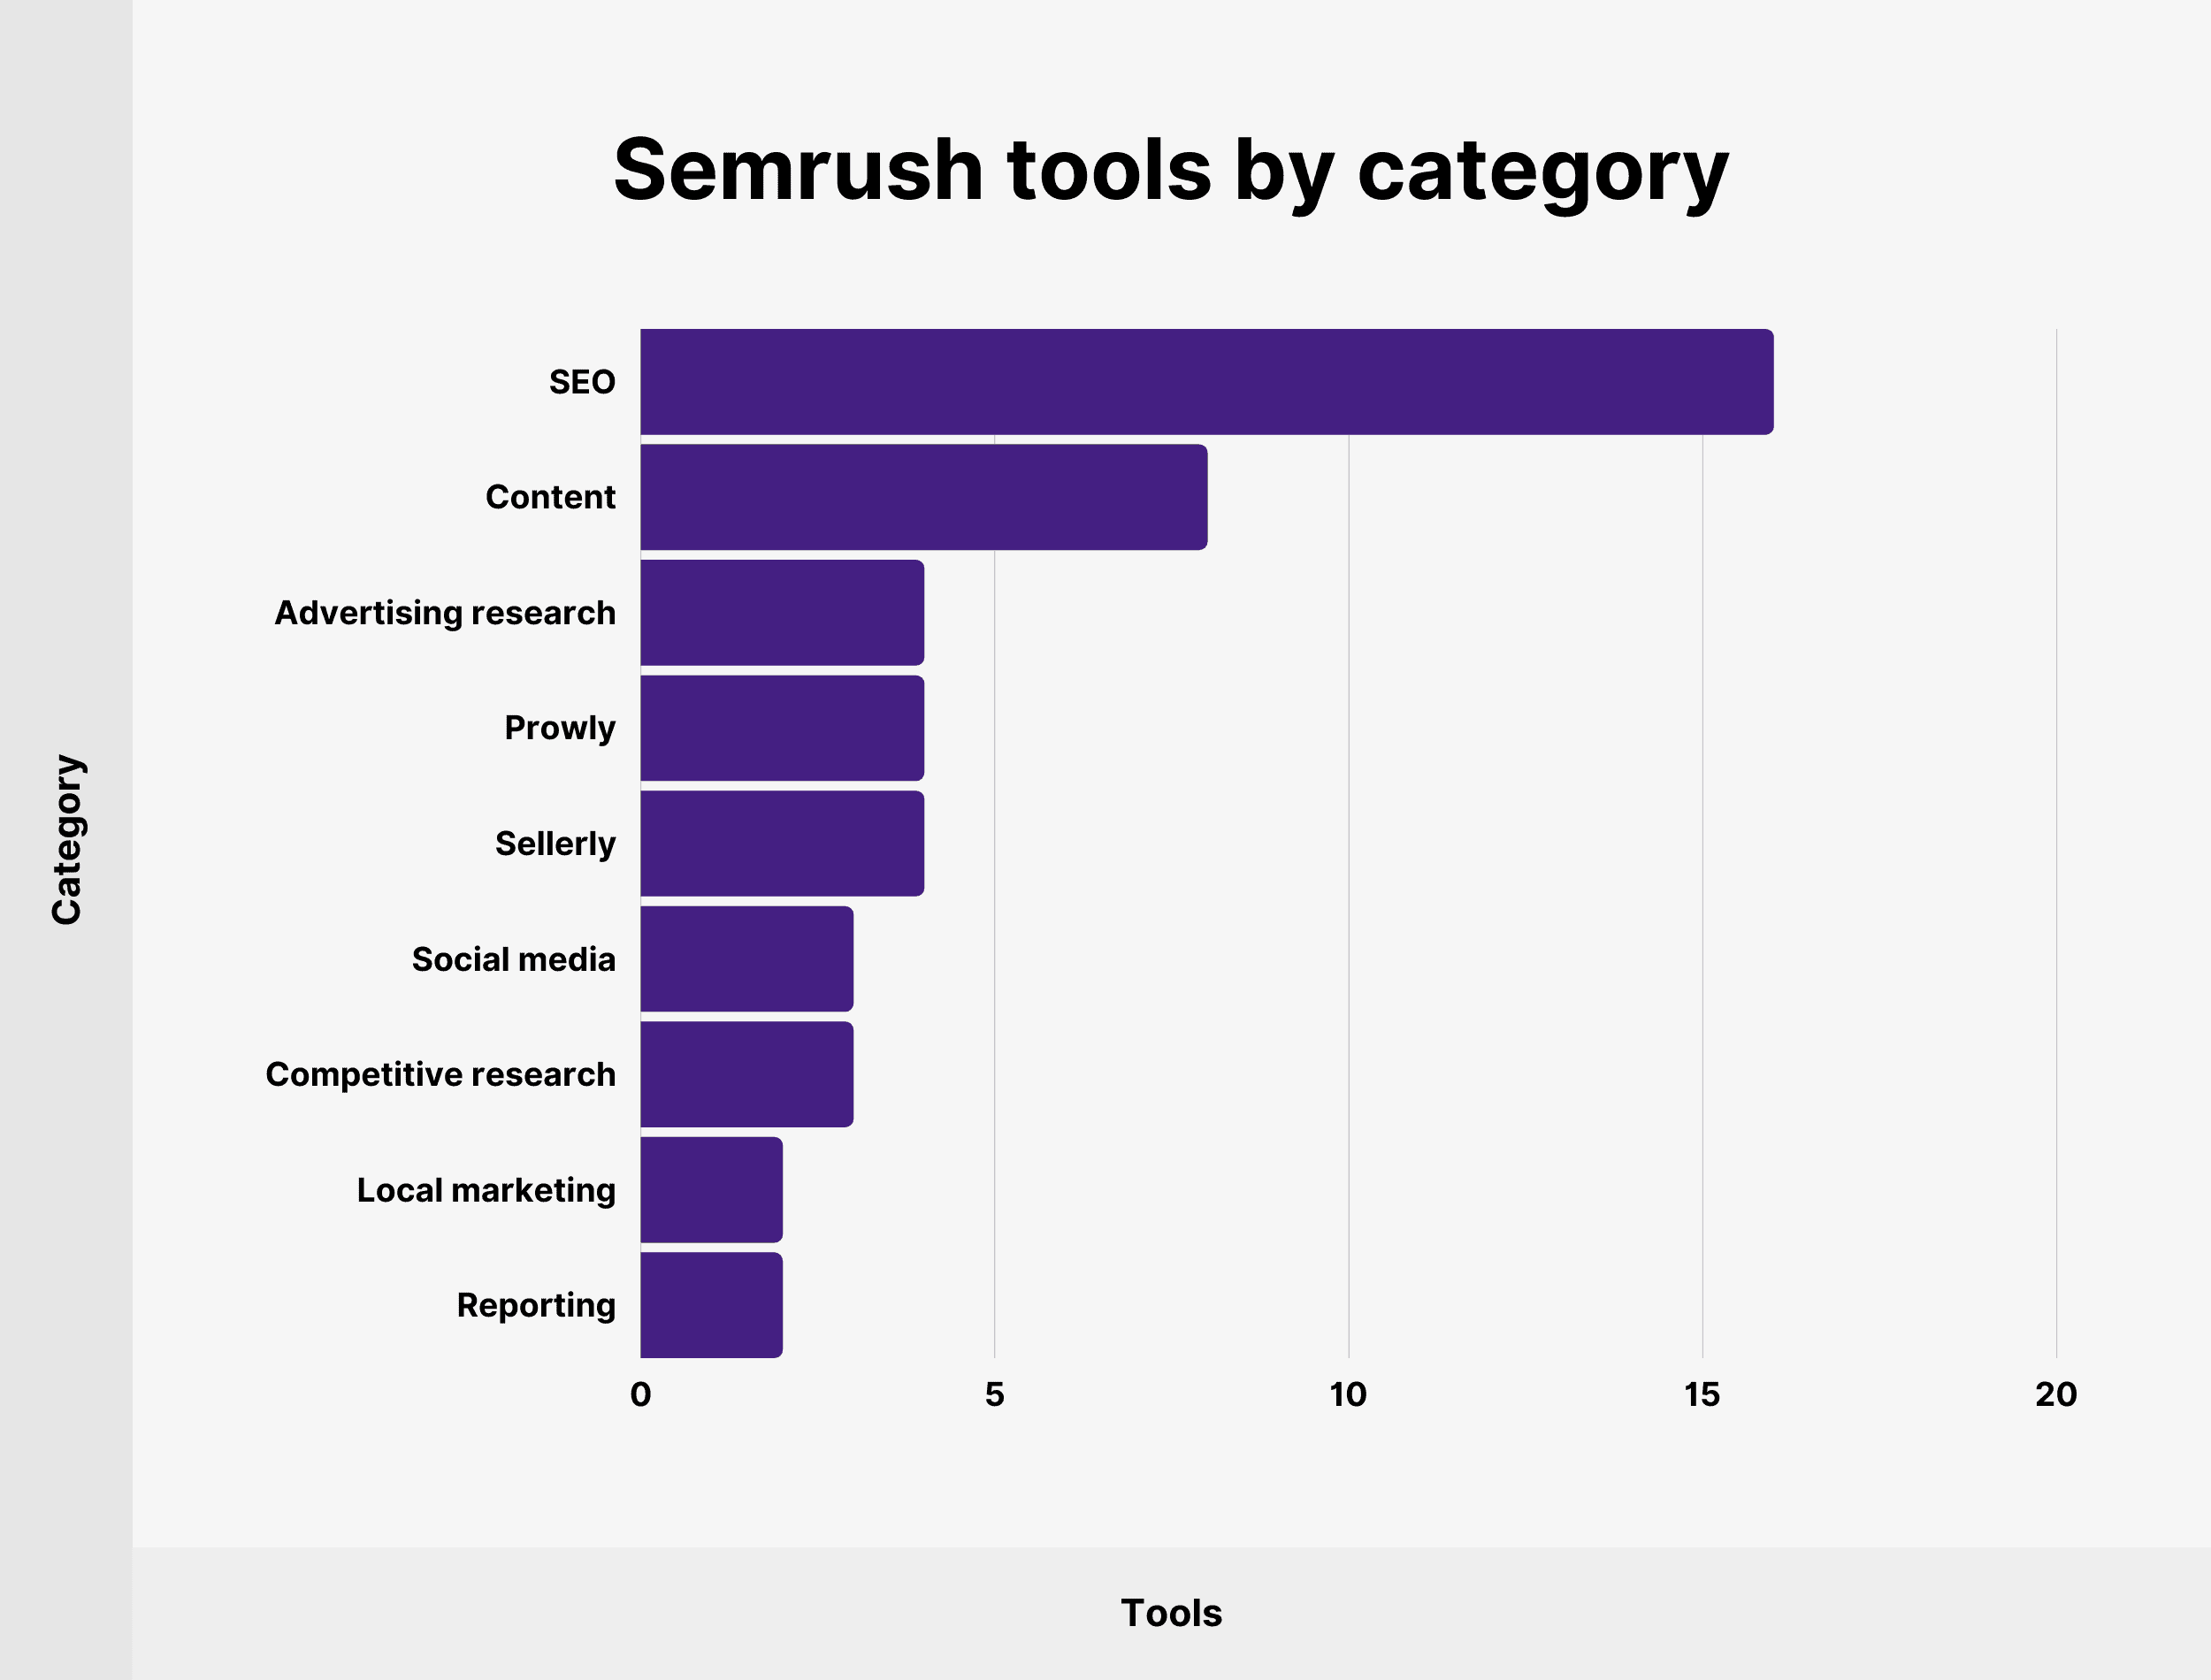 Semrush tools by category